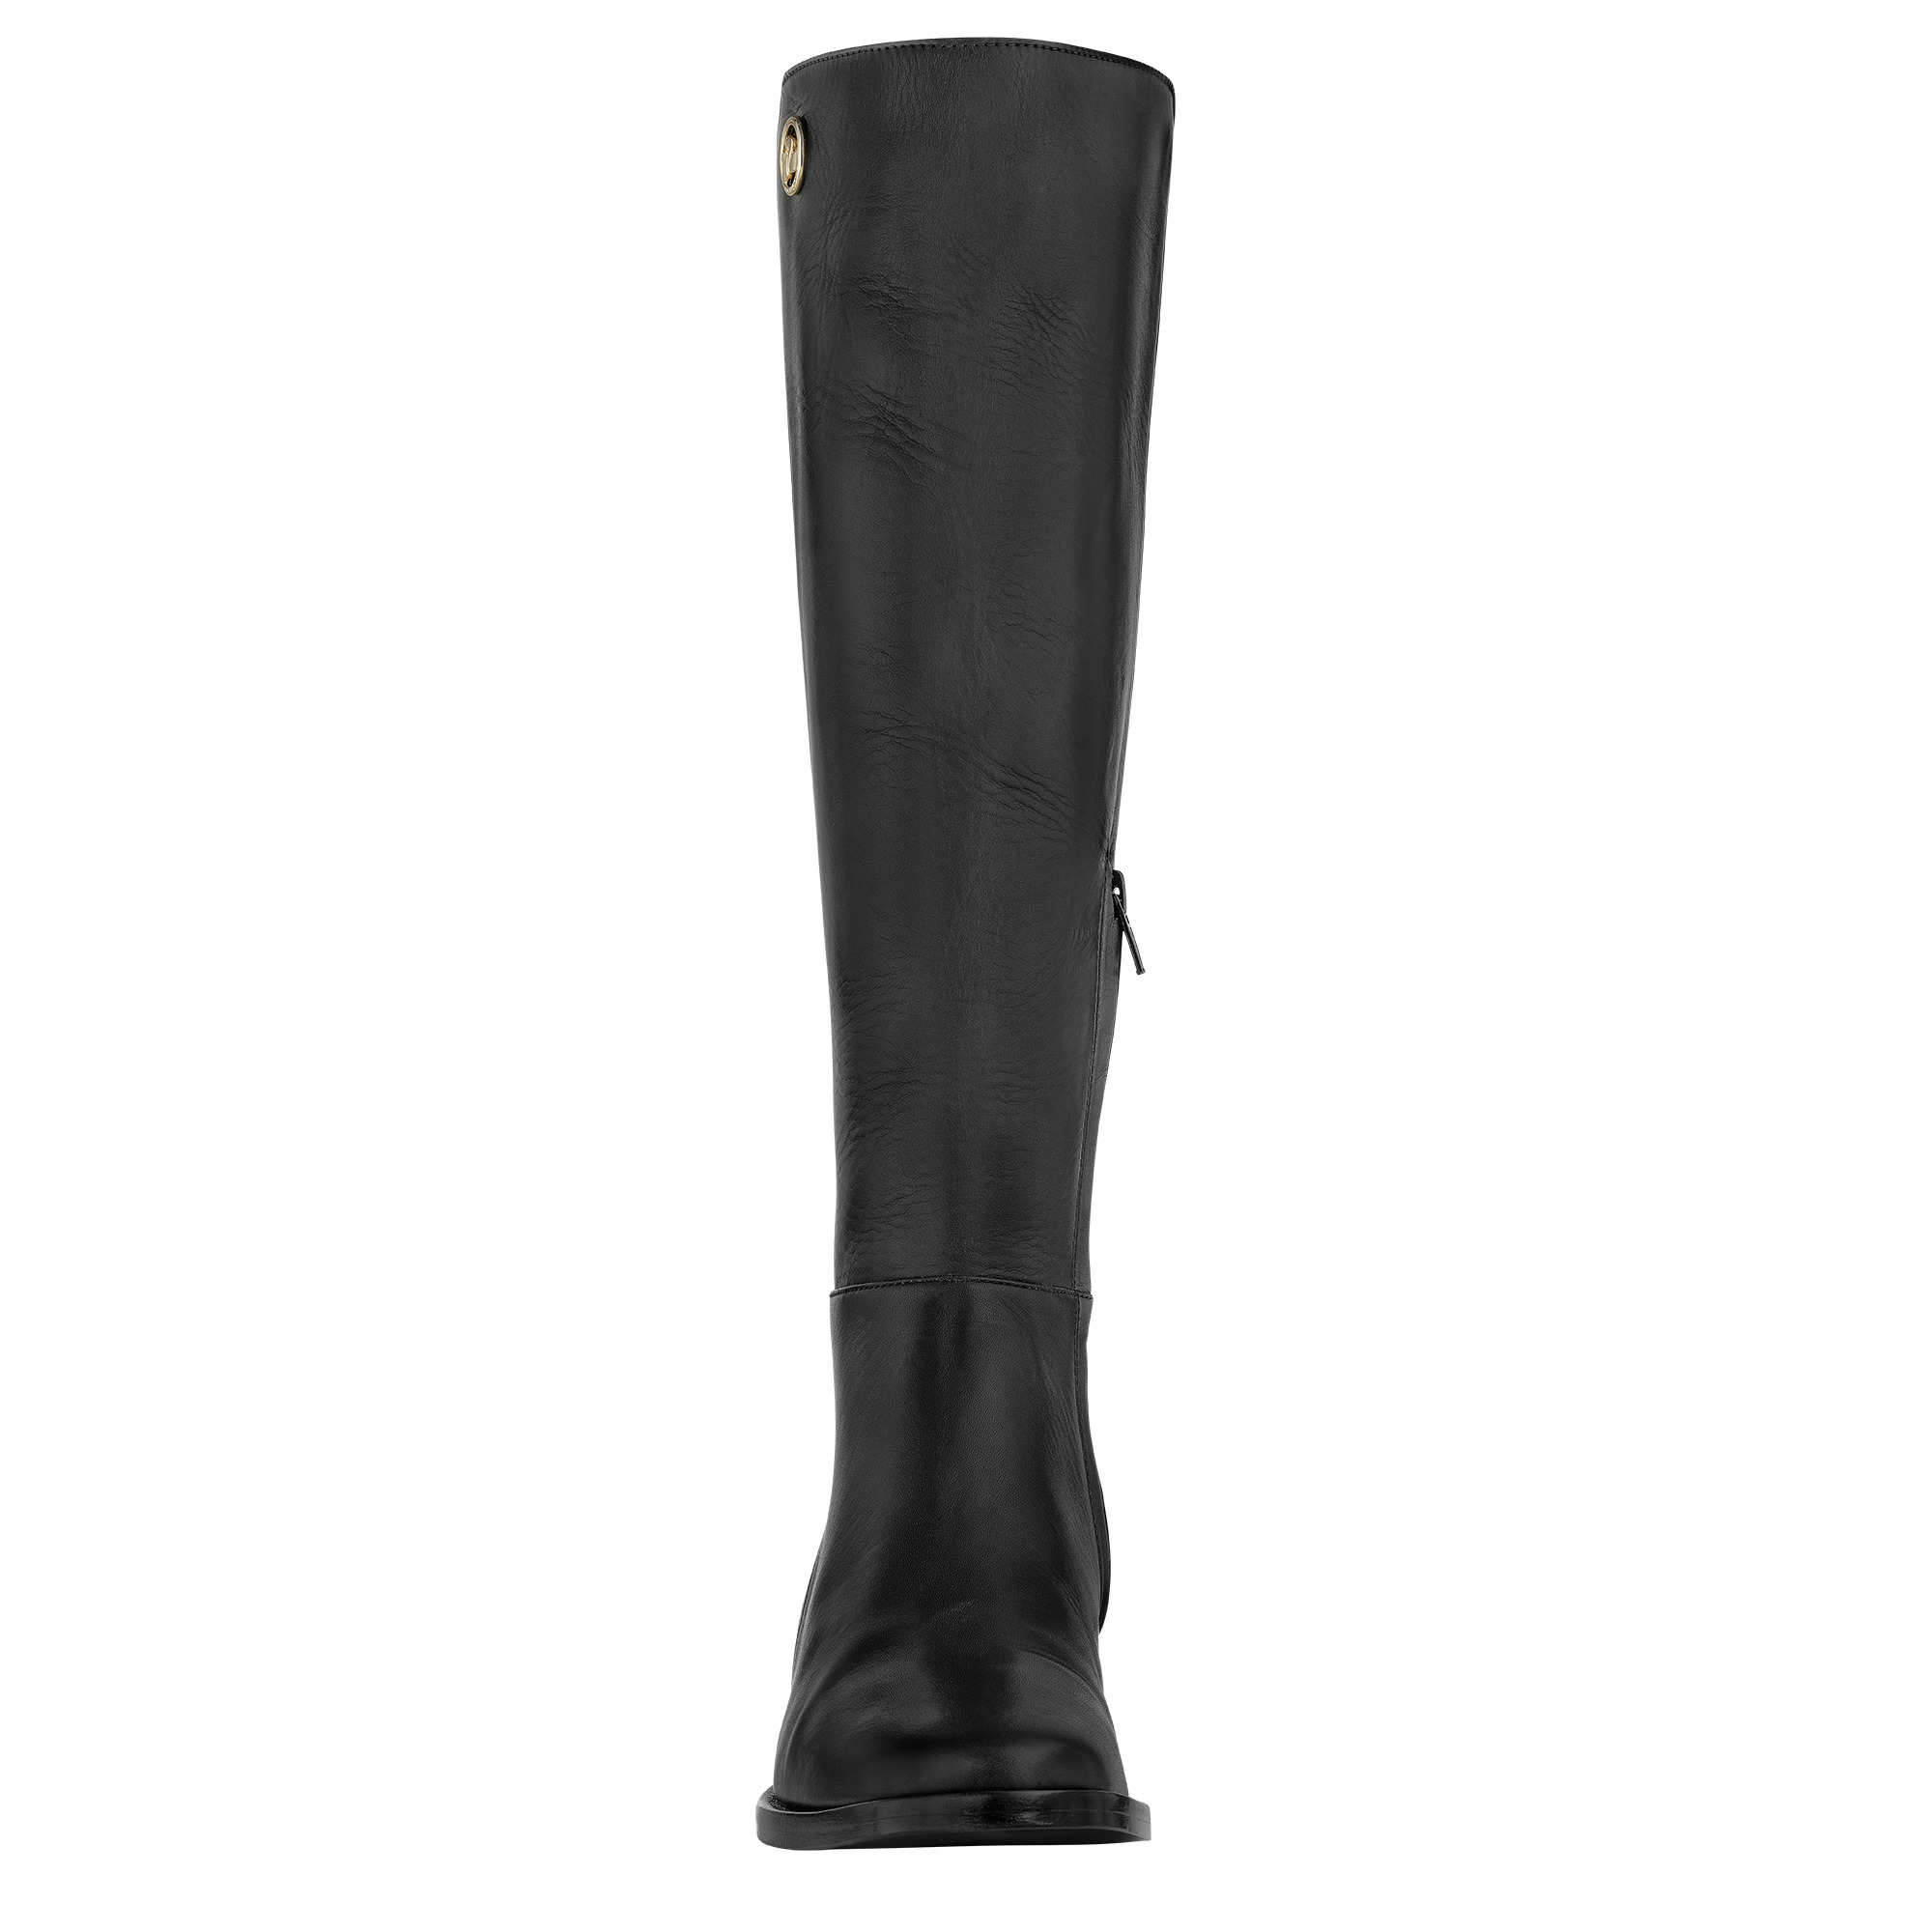 Box-trot Riding boots Black - Leather - 4